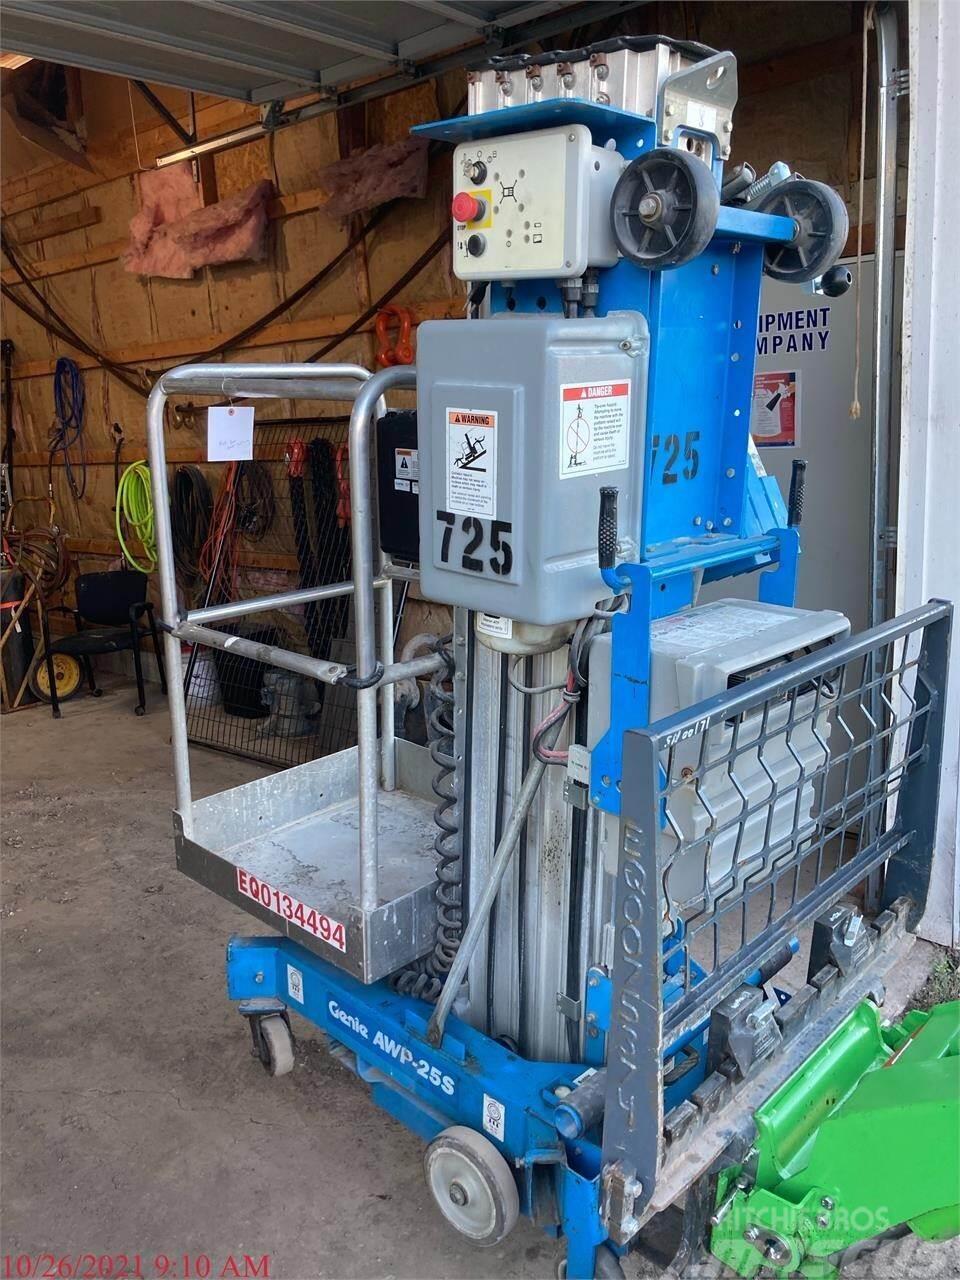 Genie AWP25S Used Personnel lifts and access elevators